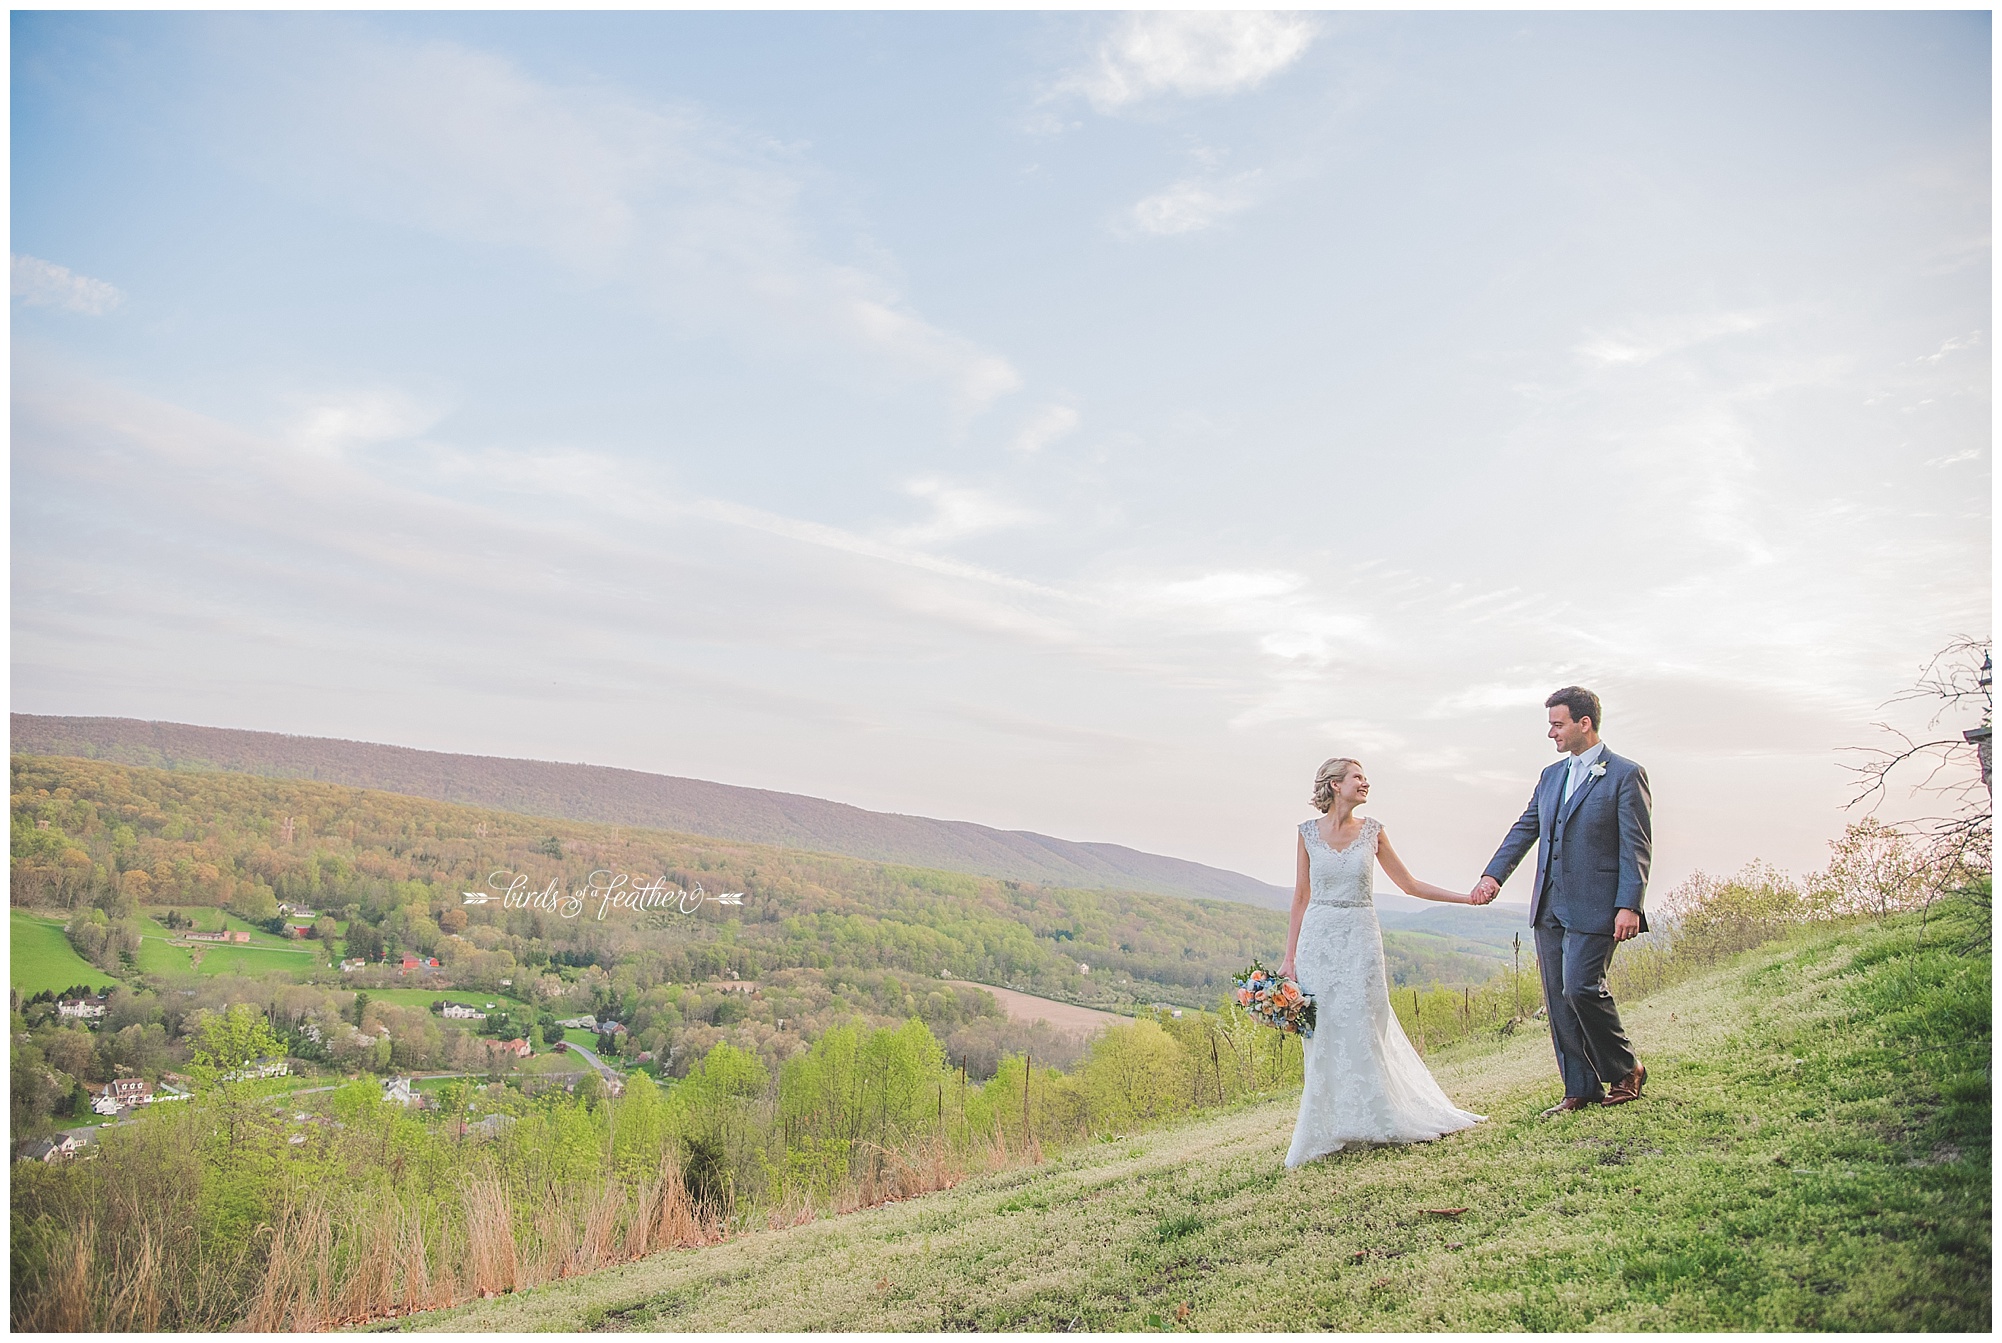 Christine & Michael | Stroudsmoor Country Inn Wedding, Stroudsburg PA | Birds of a Feather Photography